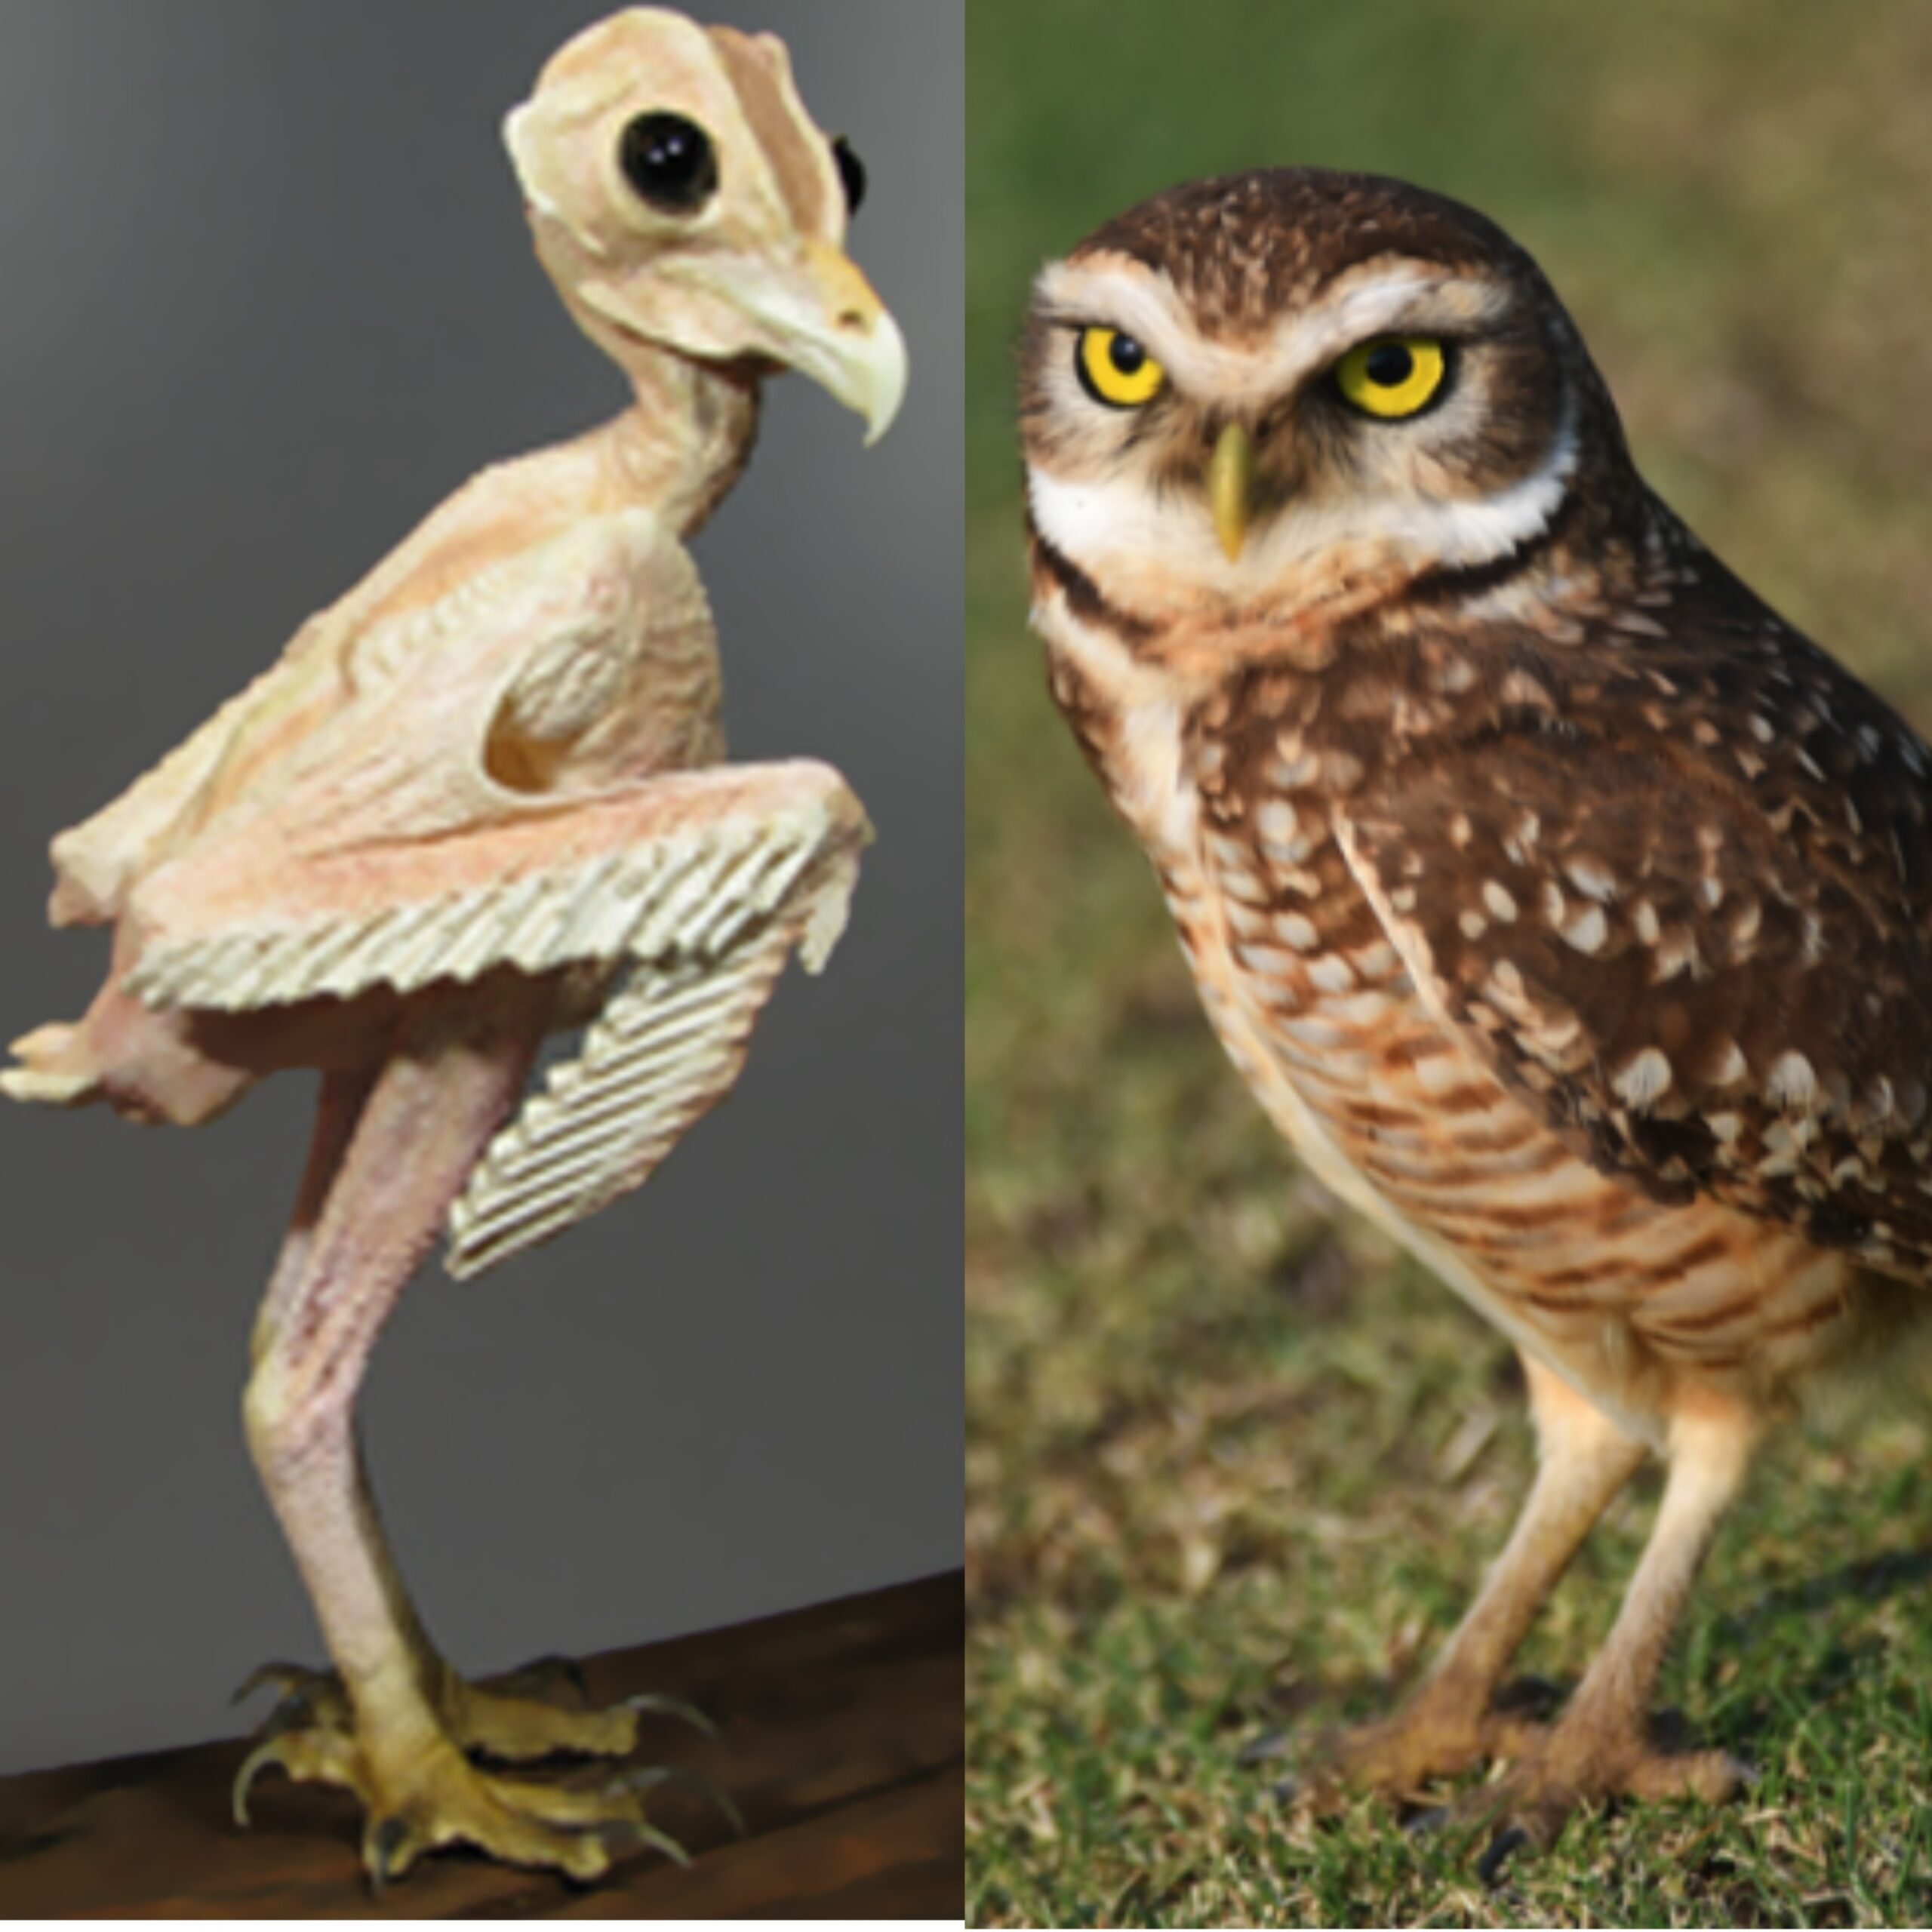 How Do Owl Without Feathers Look?